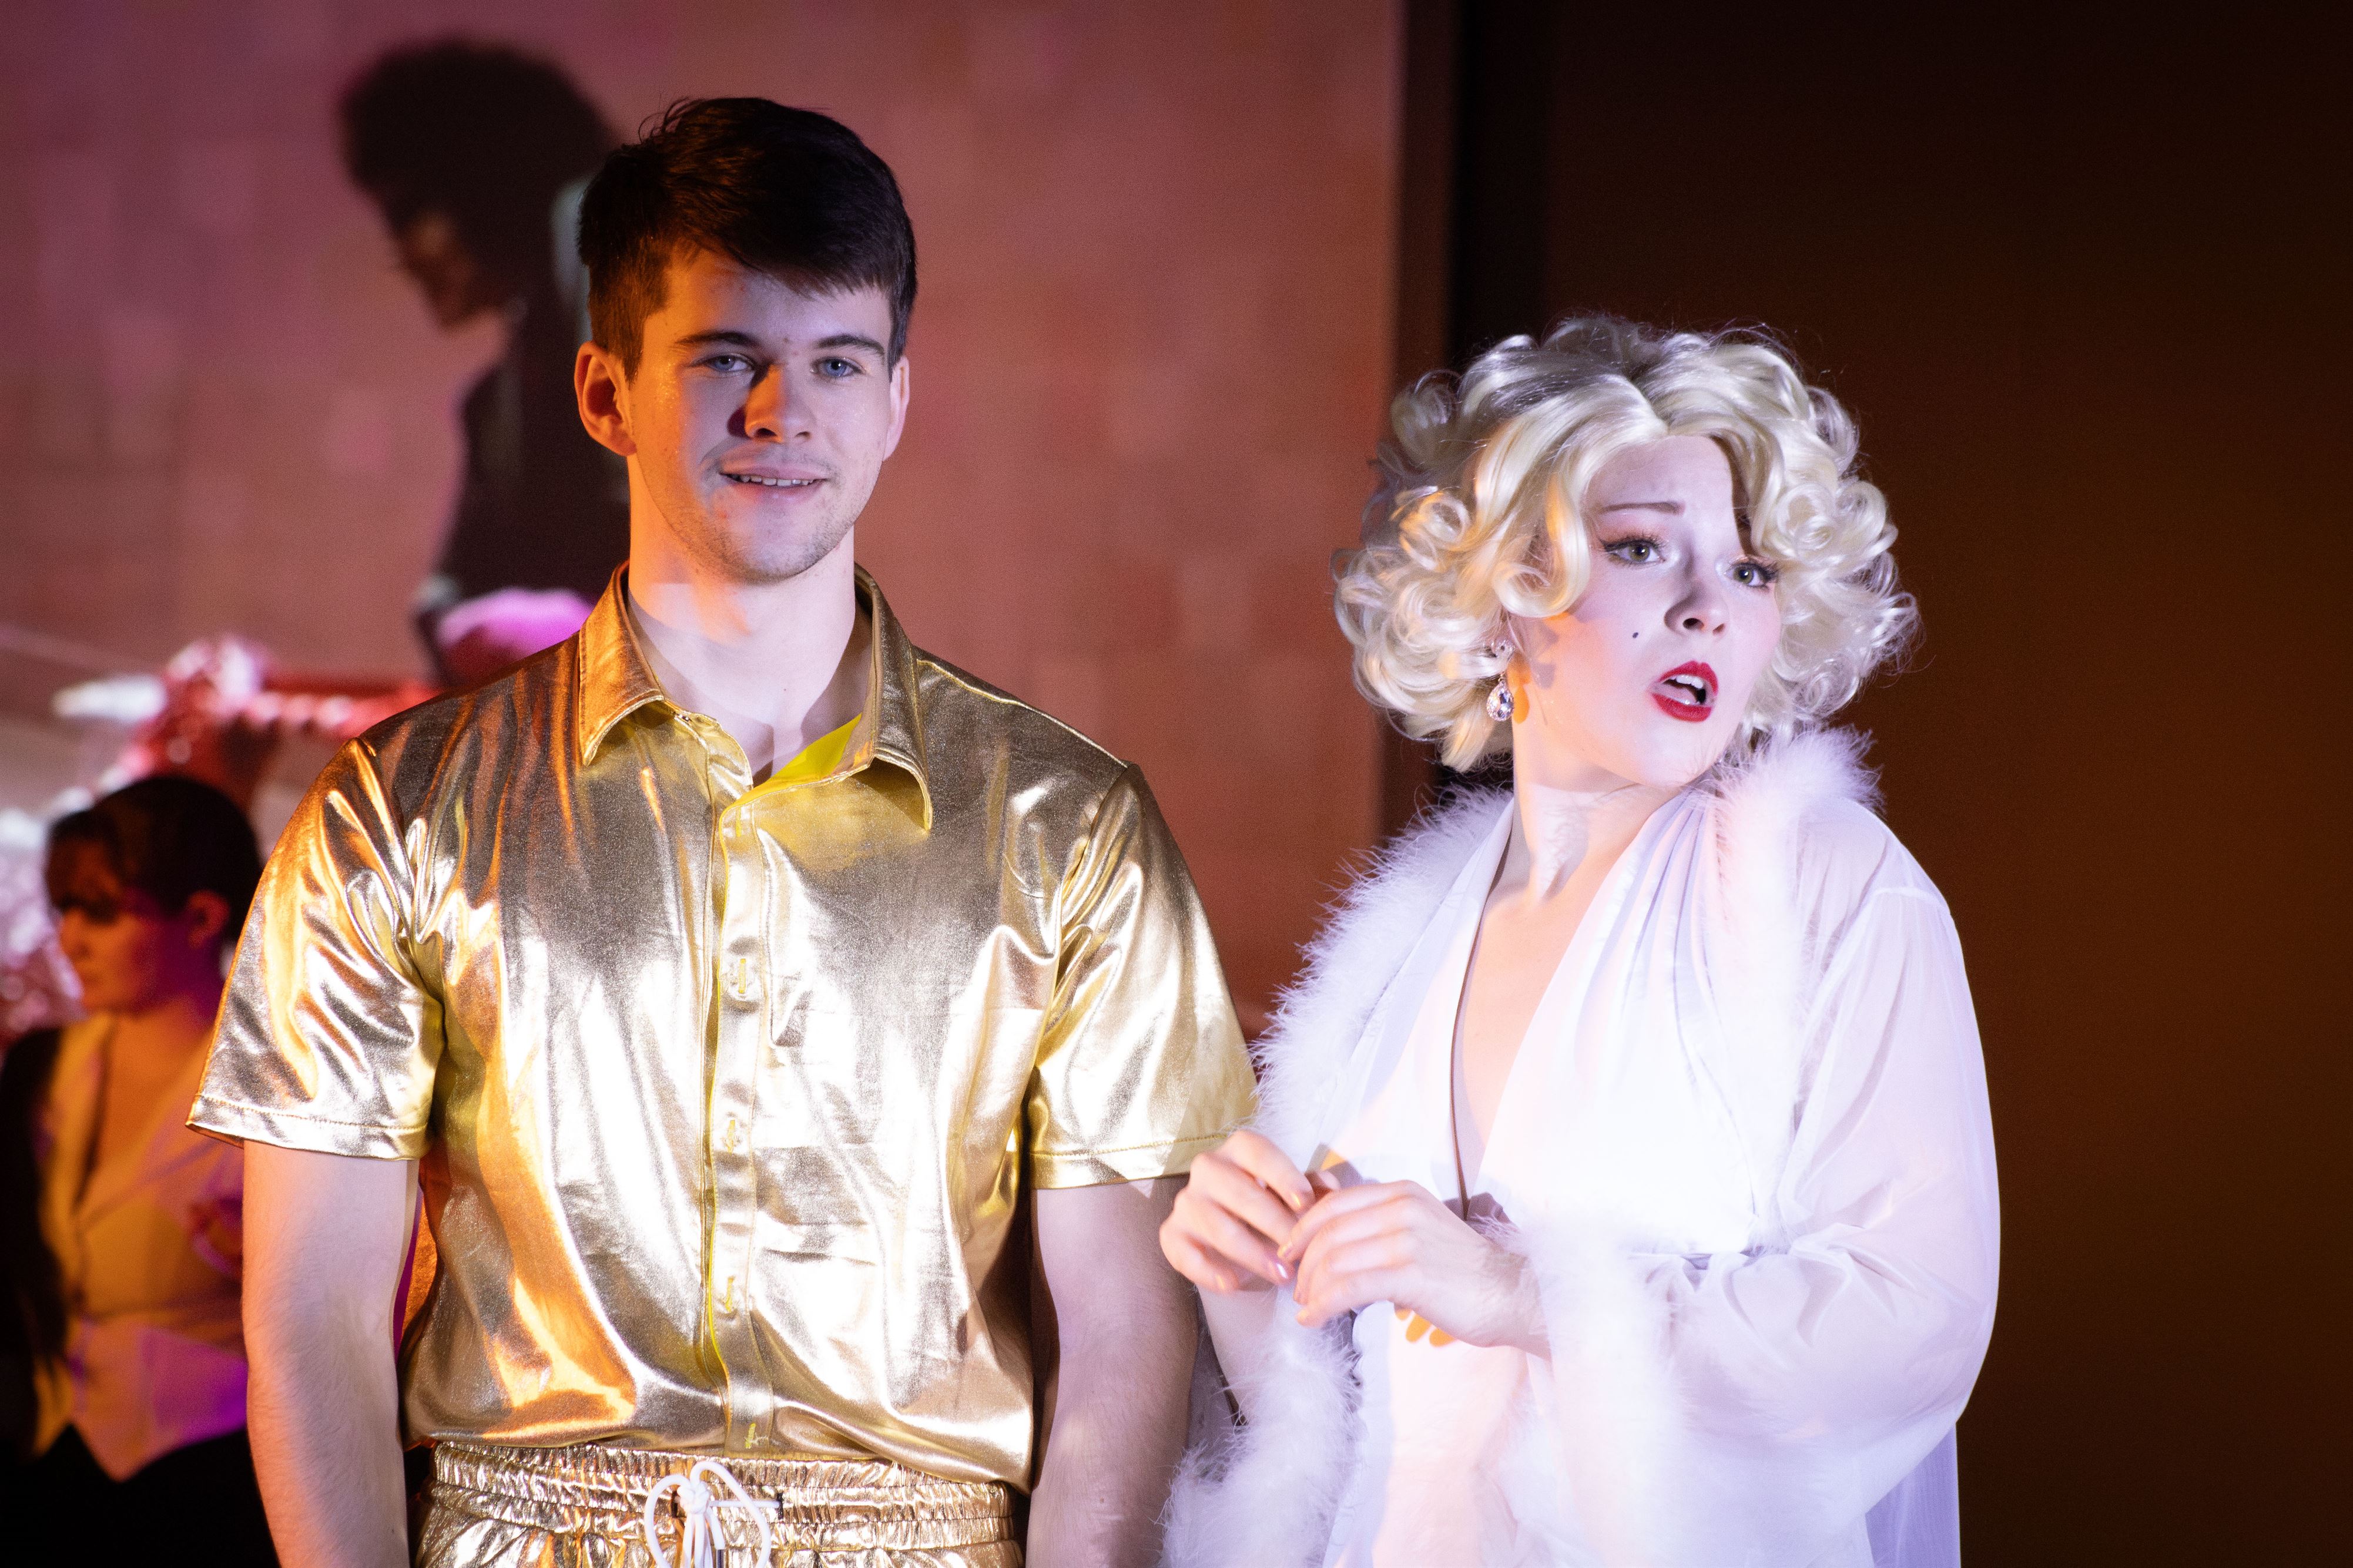 Frank-N-Furter, played by Rylee Rose, performing the "Charles Atlas song" while admiring Rocky, played by Will Barnes. Dani Mazariegos | The Montclarion